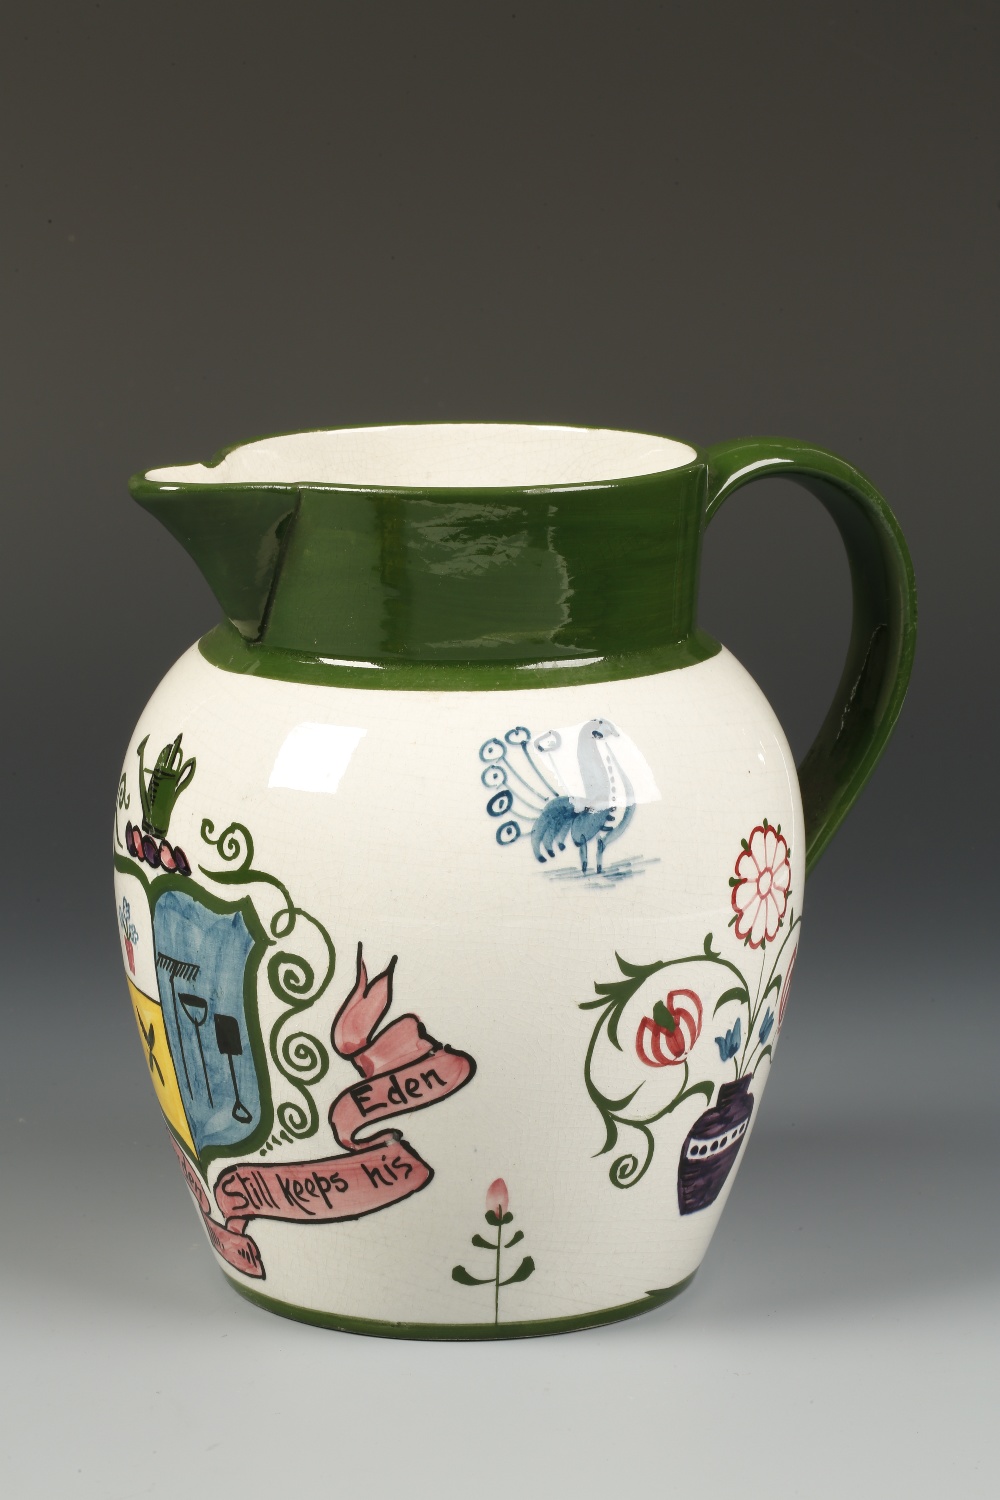 A WEMYSS "GARDENING" JUG with painted floral and bird decoration and a central motto "Who loves